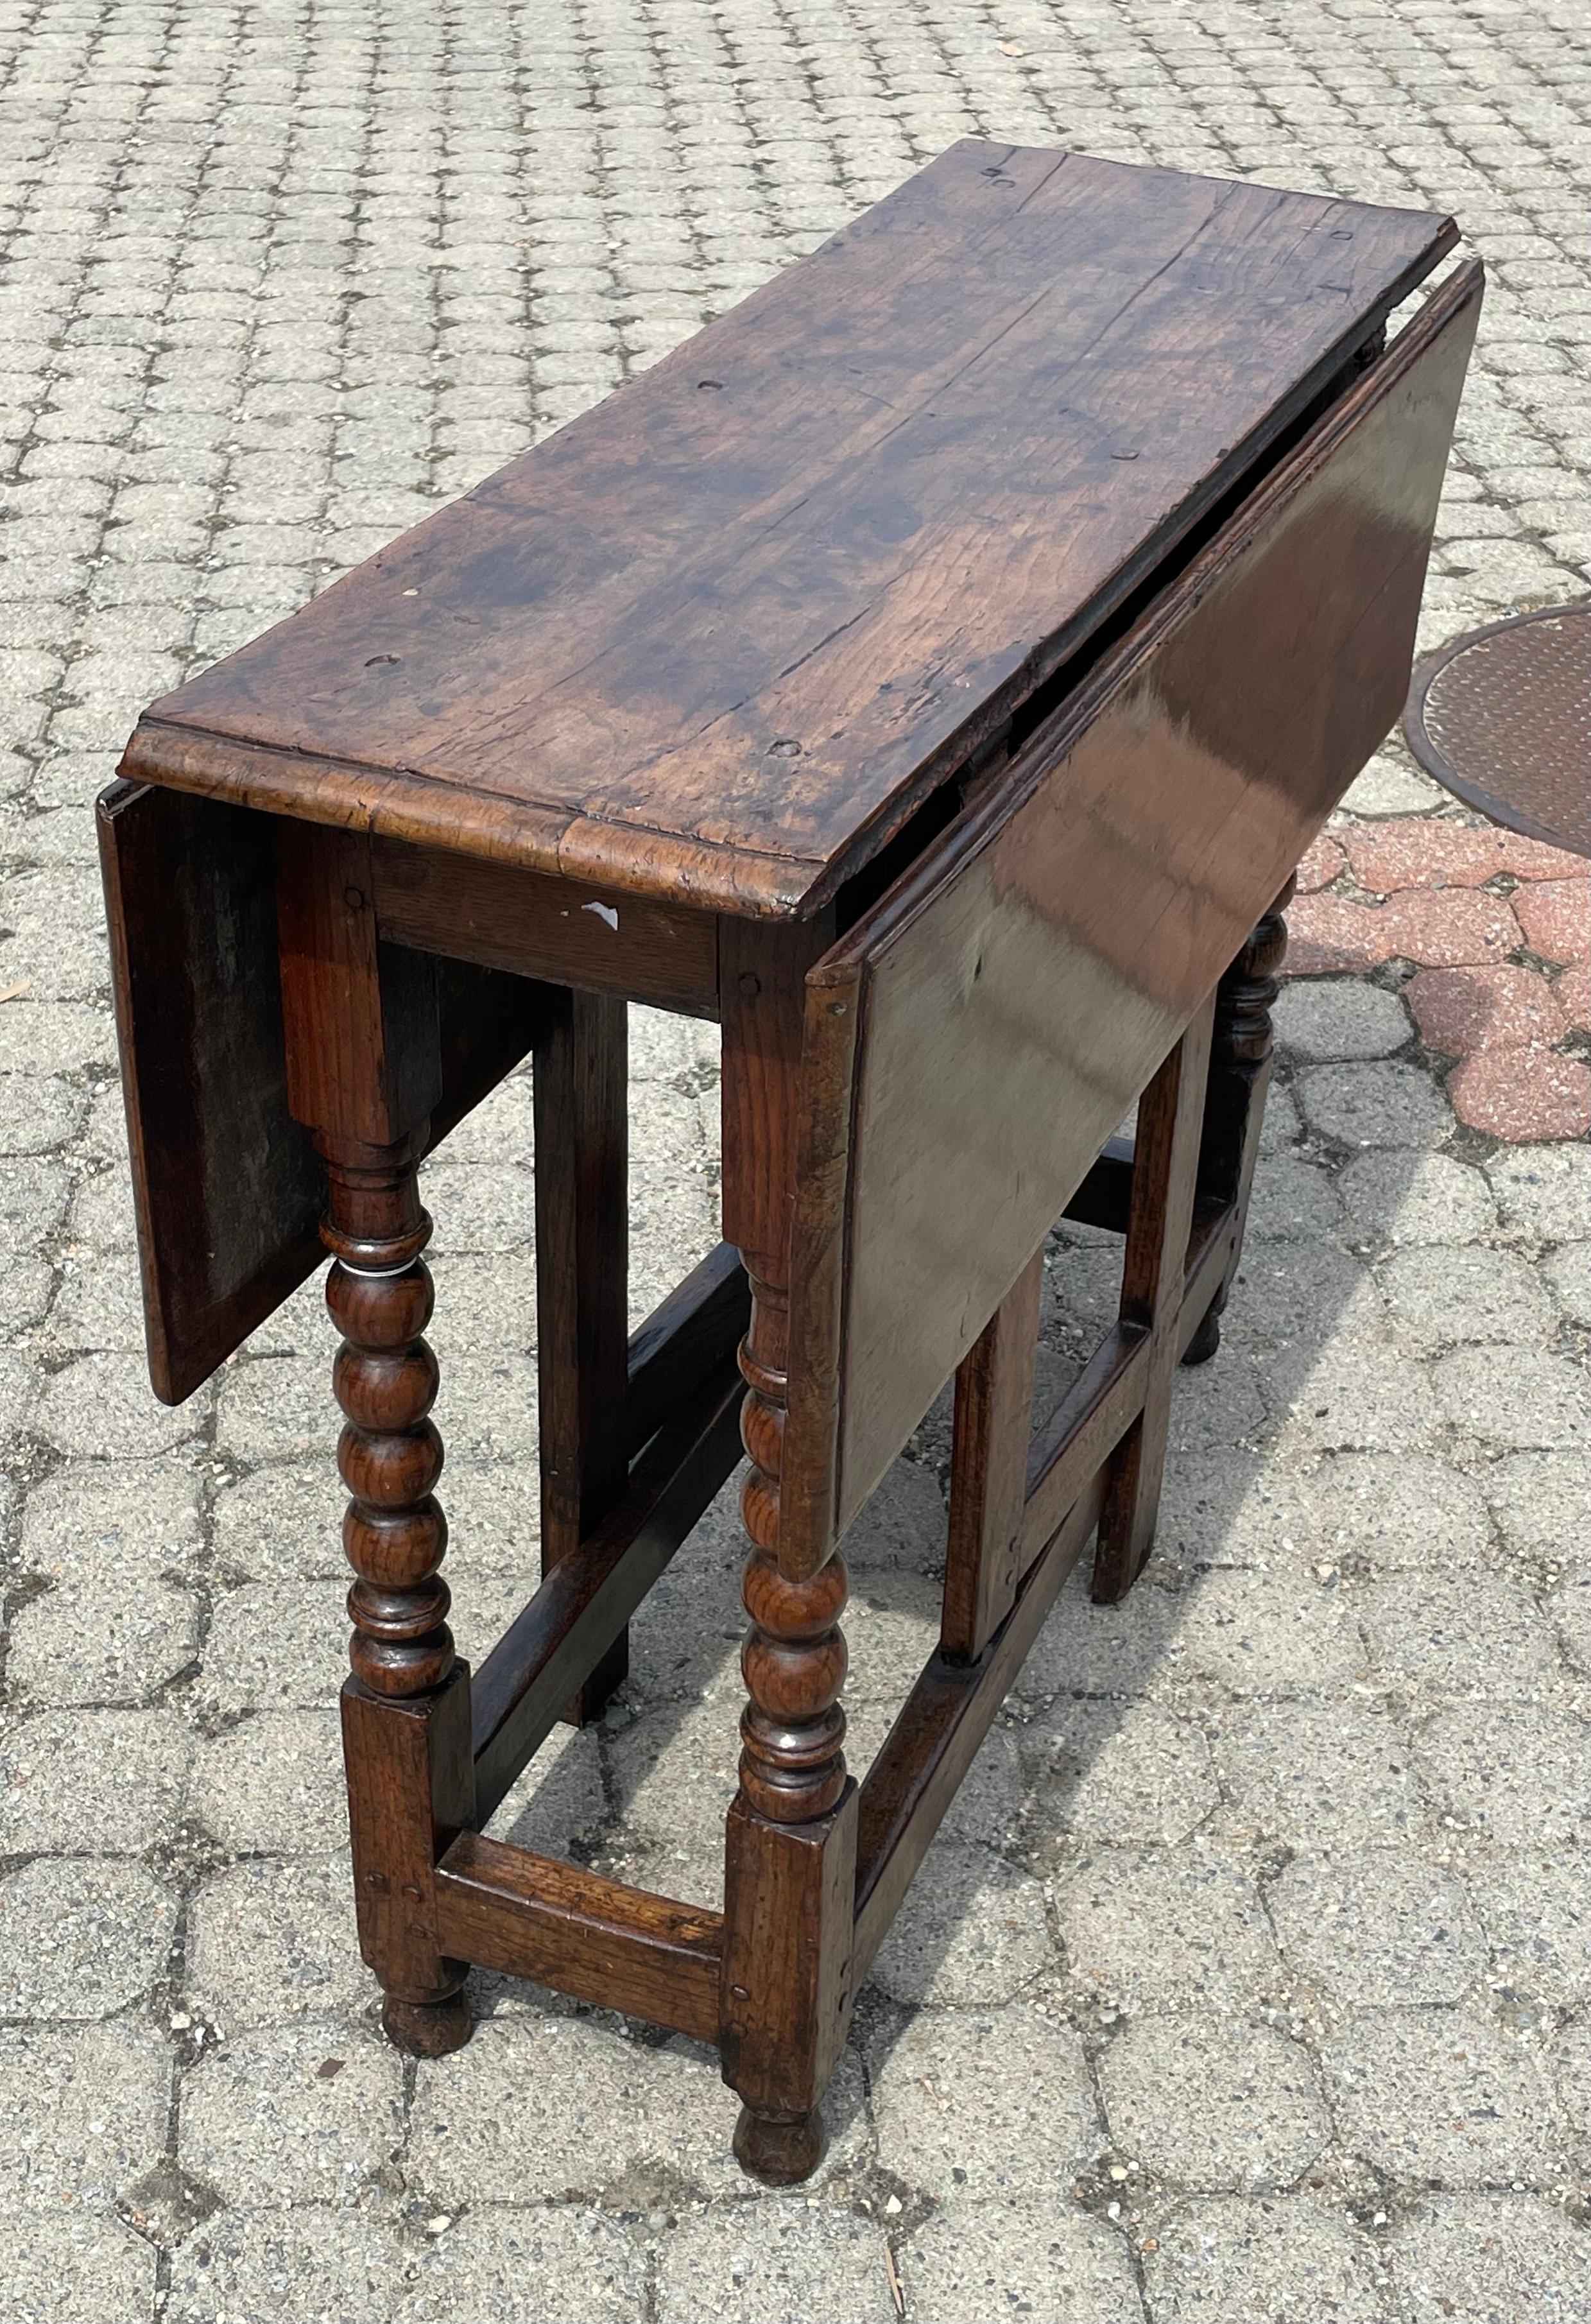 gateleg table with chairs